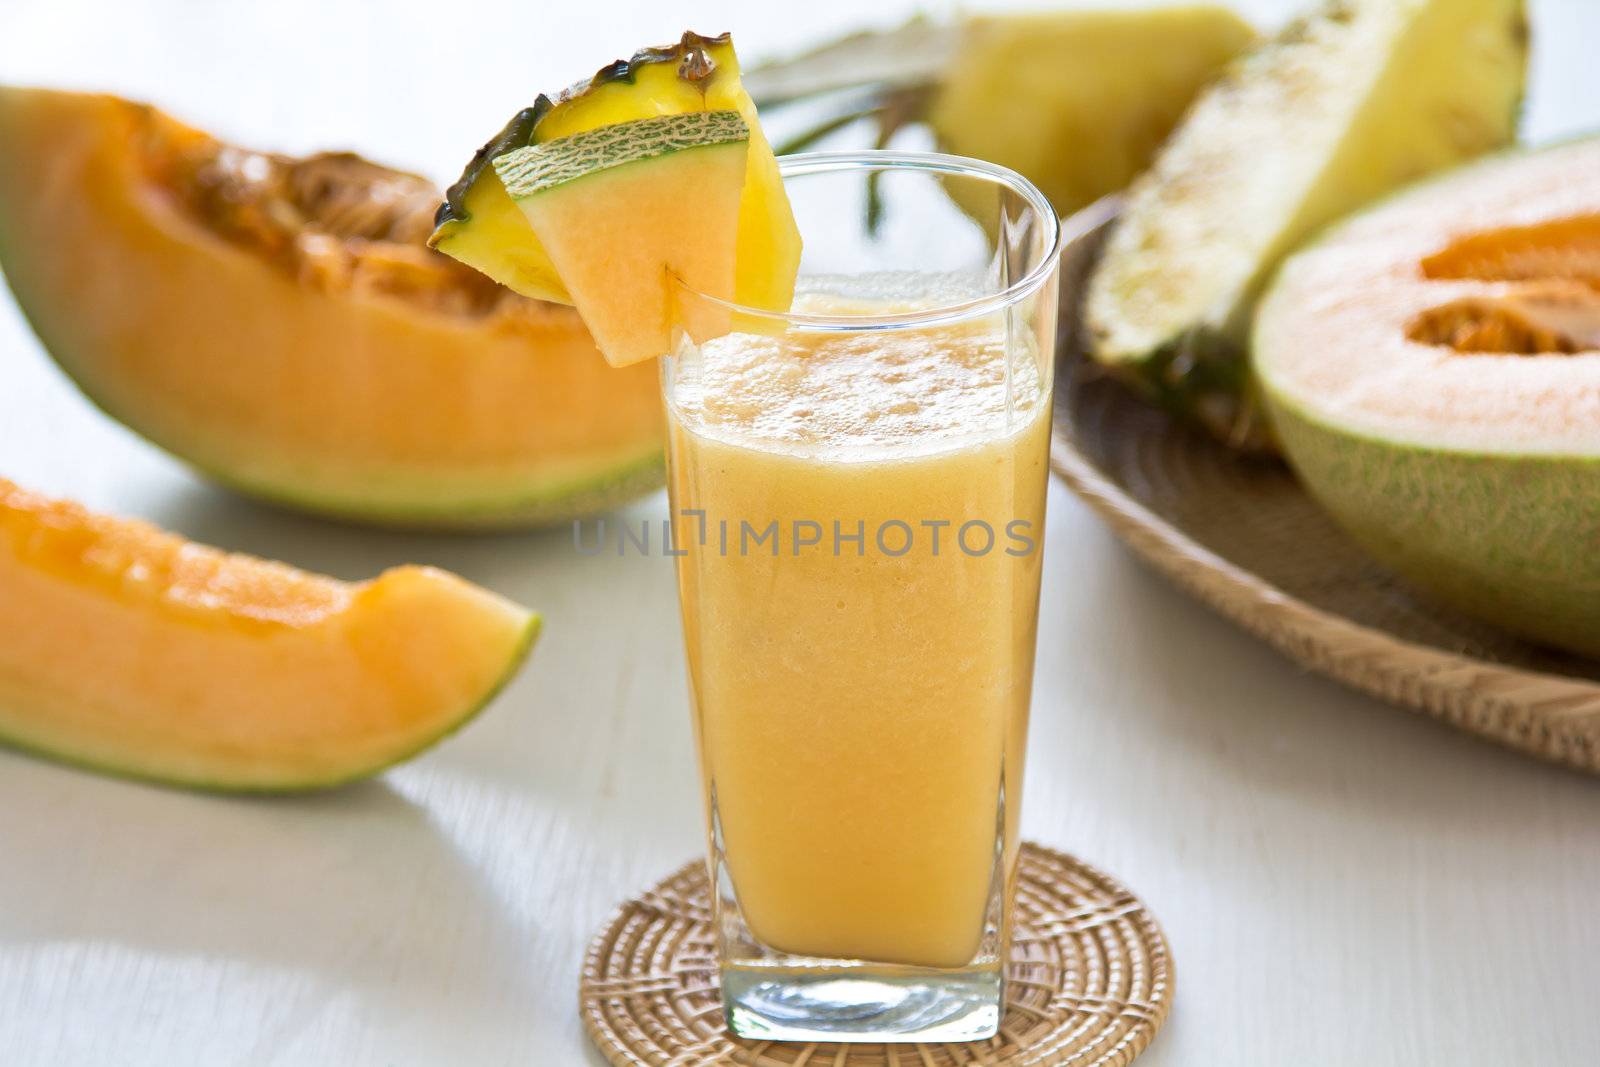 Cantaloupe and Pineapple smoothie by some fresh cantaloupe and pineapple